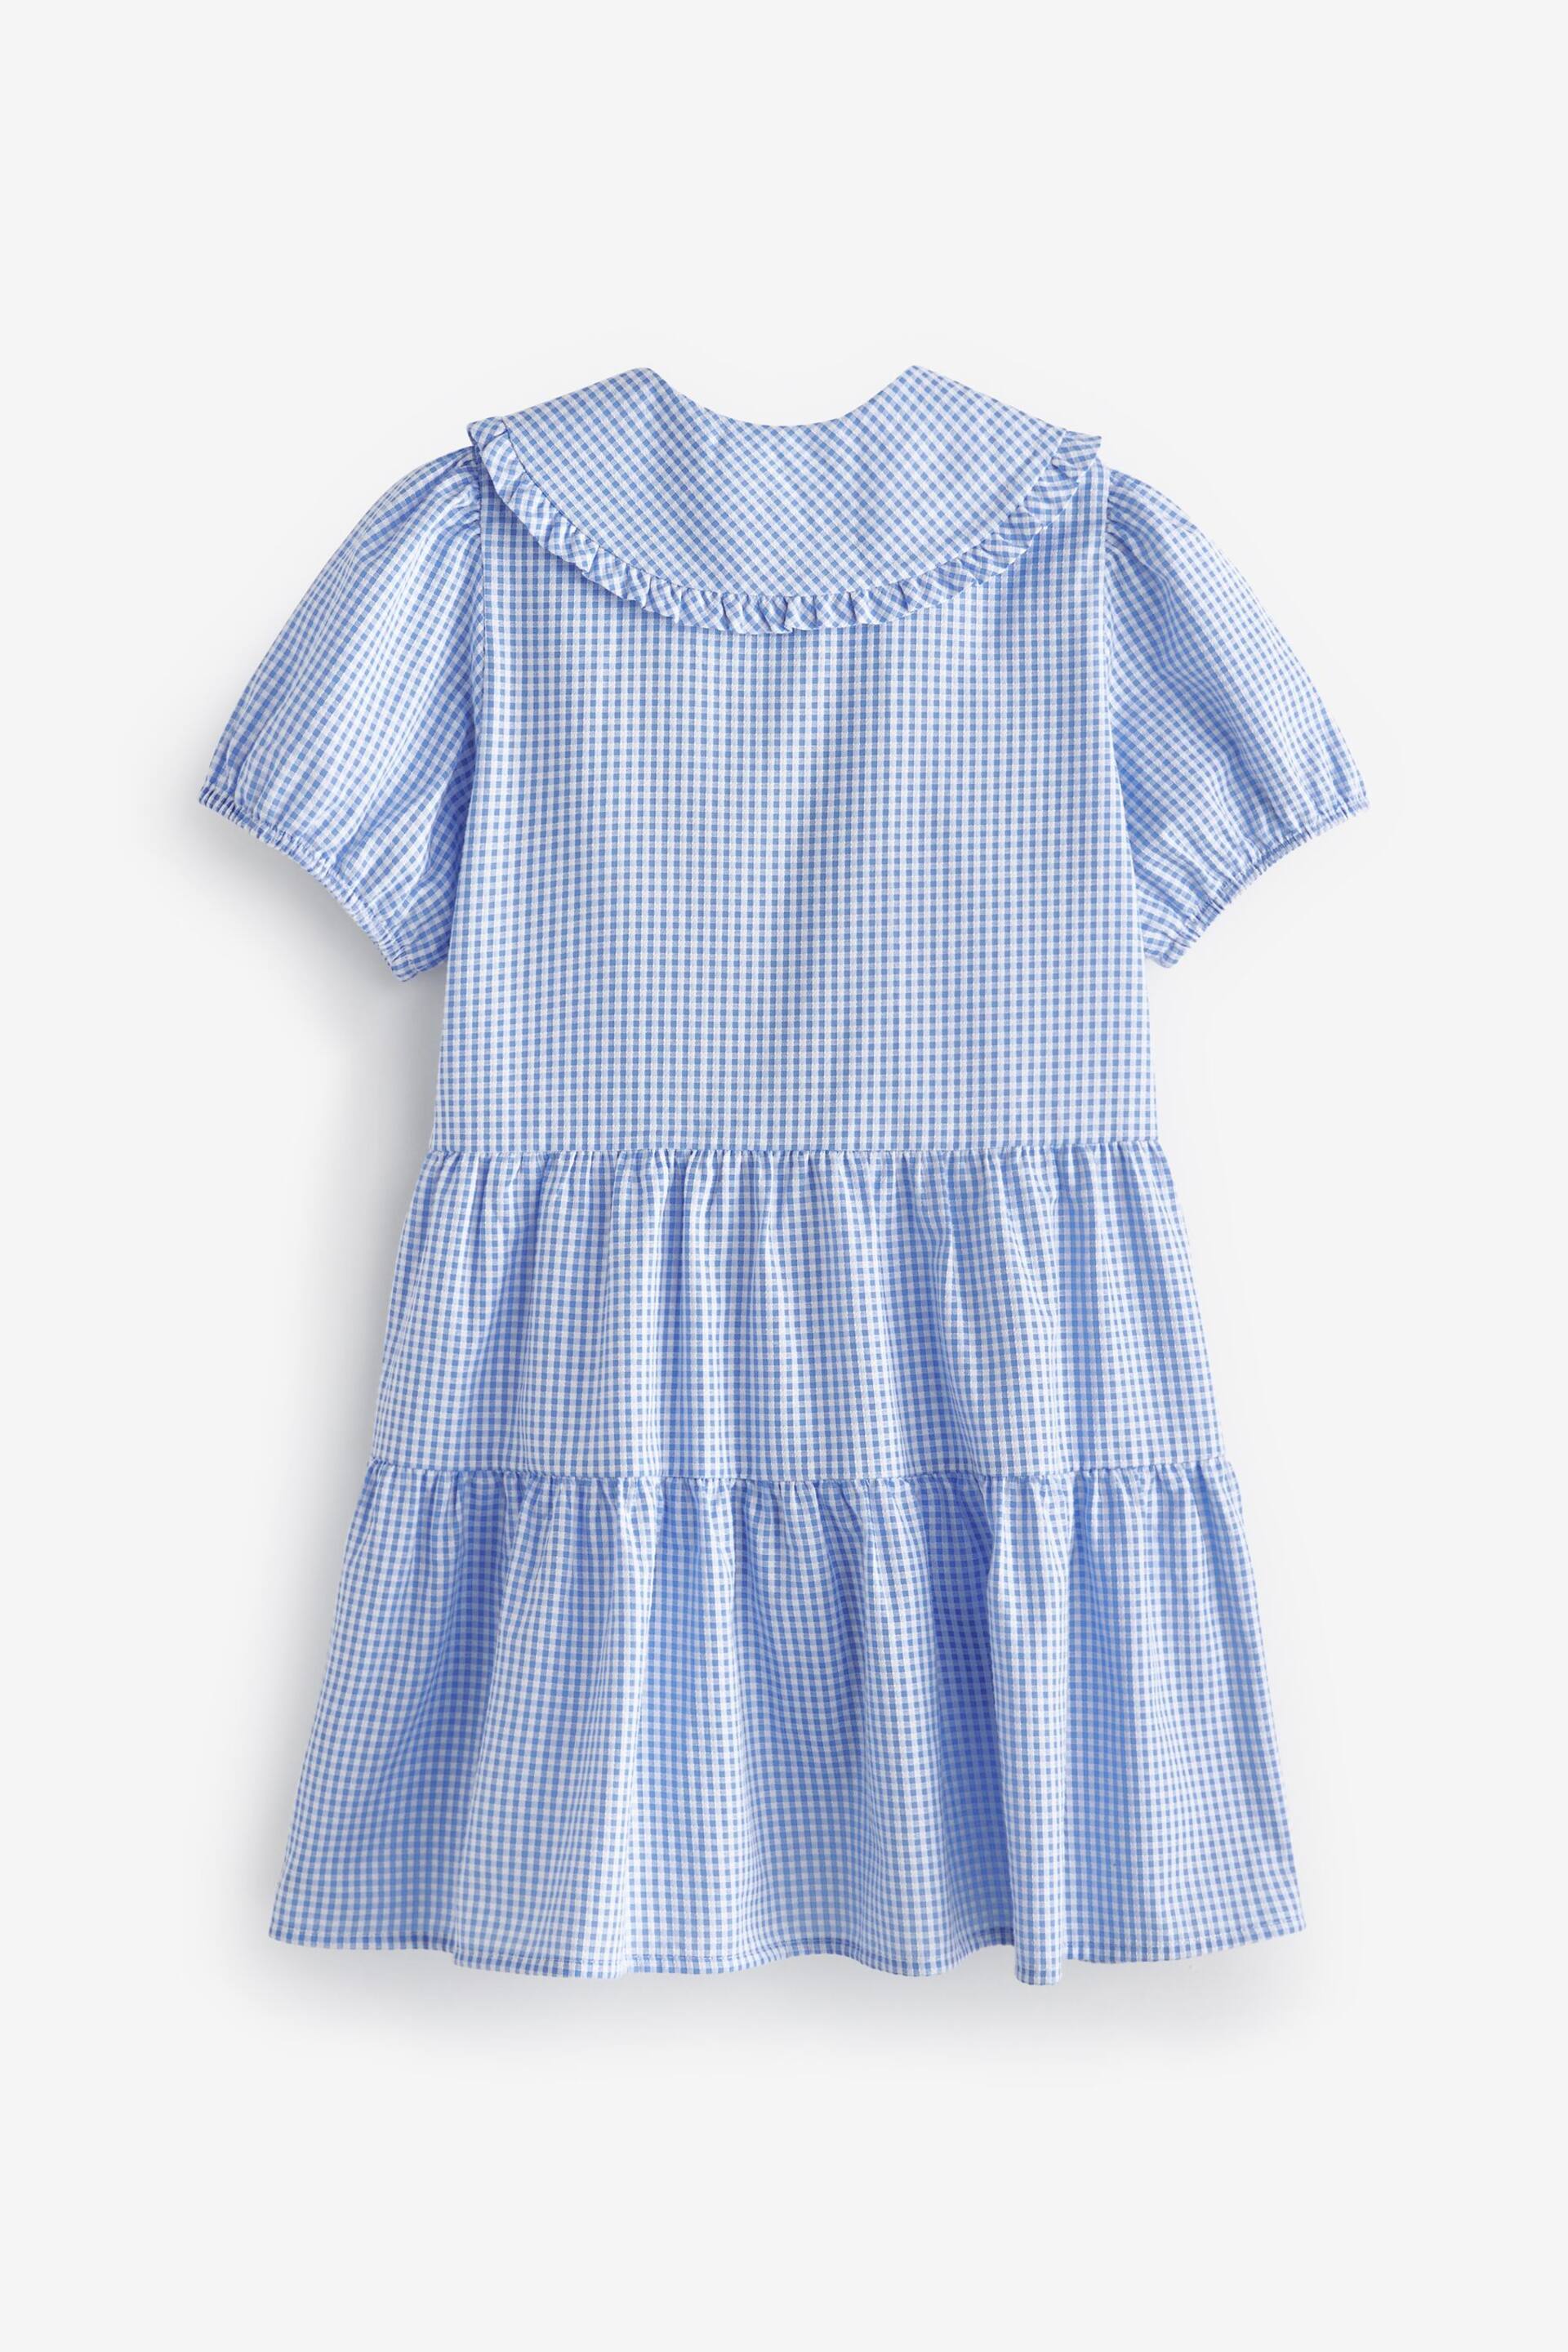 Blue Cotton Rich School Gingham Tiered Pretty Collar Dress (3-14yrs) - Image 6 of 7